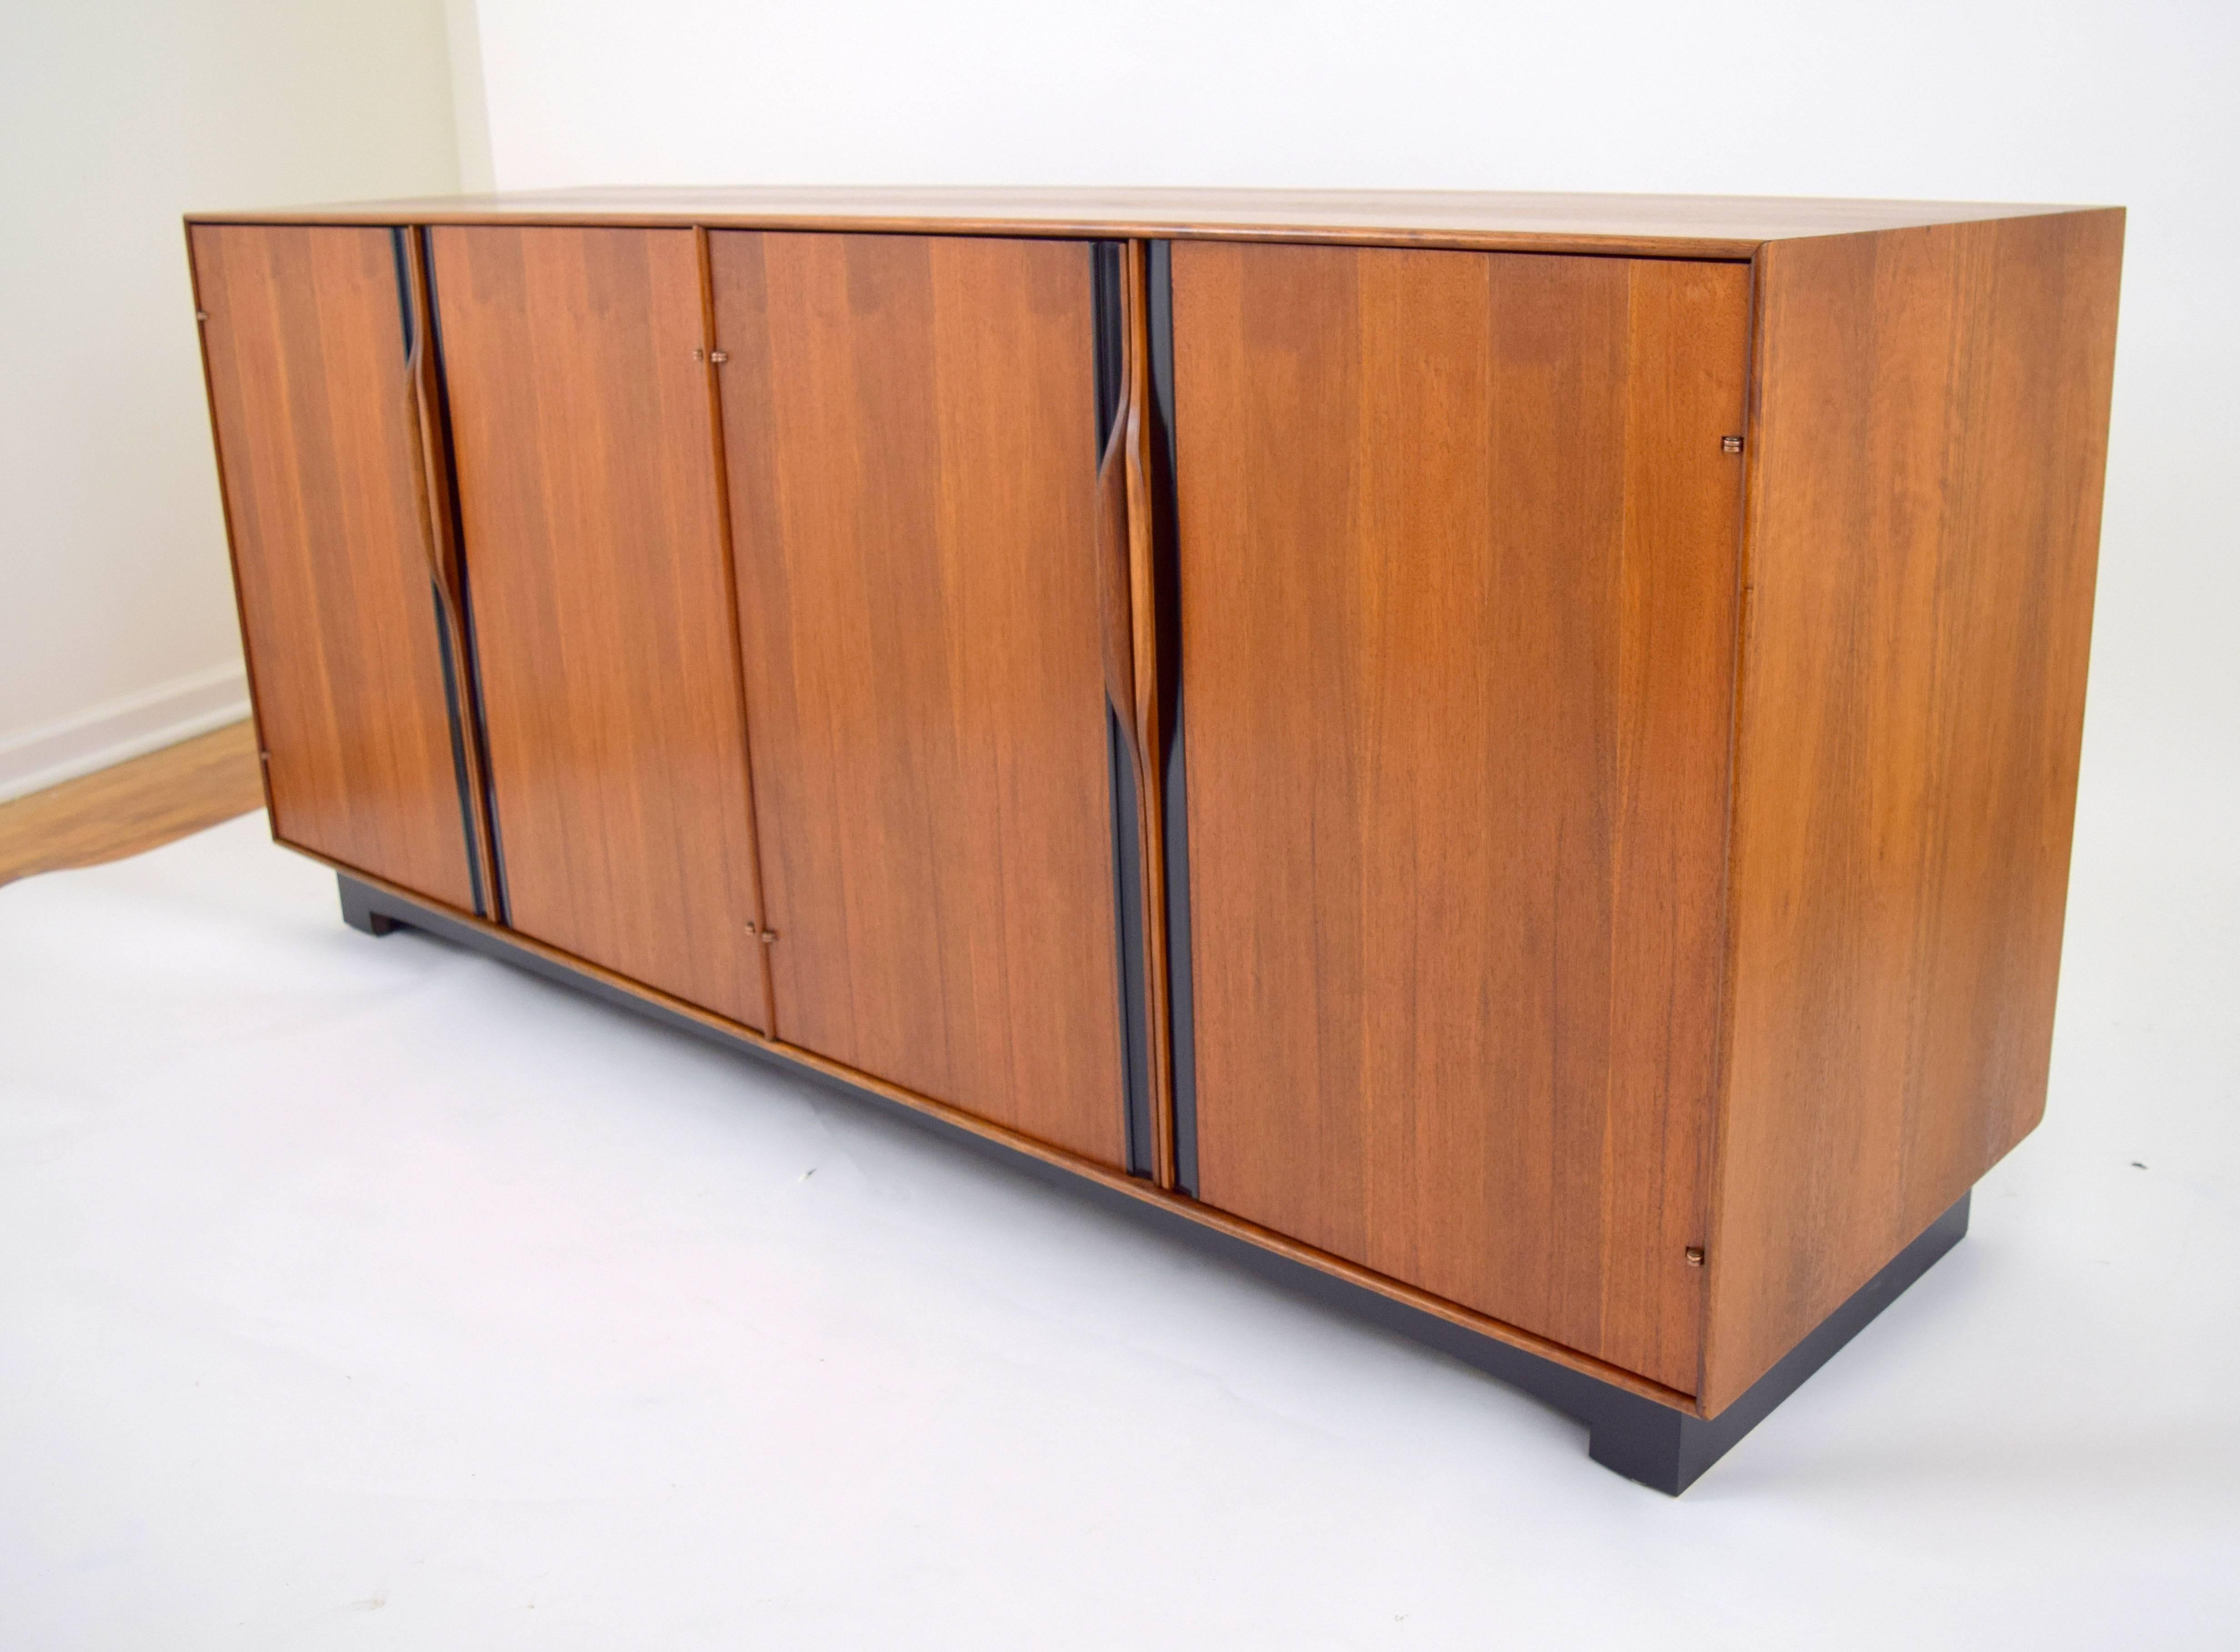 John Kapel for Glenn of California walnut credenza or sideboard with sculpted walnut handles and black plastic inlay. Four doors conceal one adjustable interior shelf on each side, and two shallow drawers on one side. Lovely oiled walnut case with